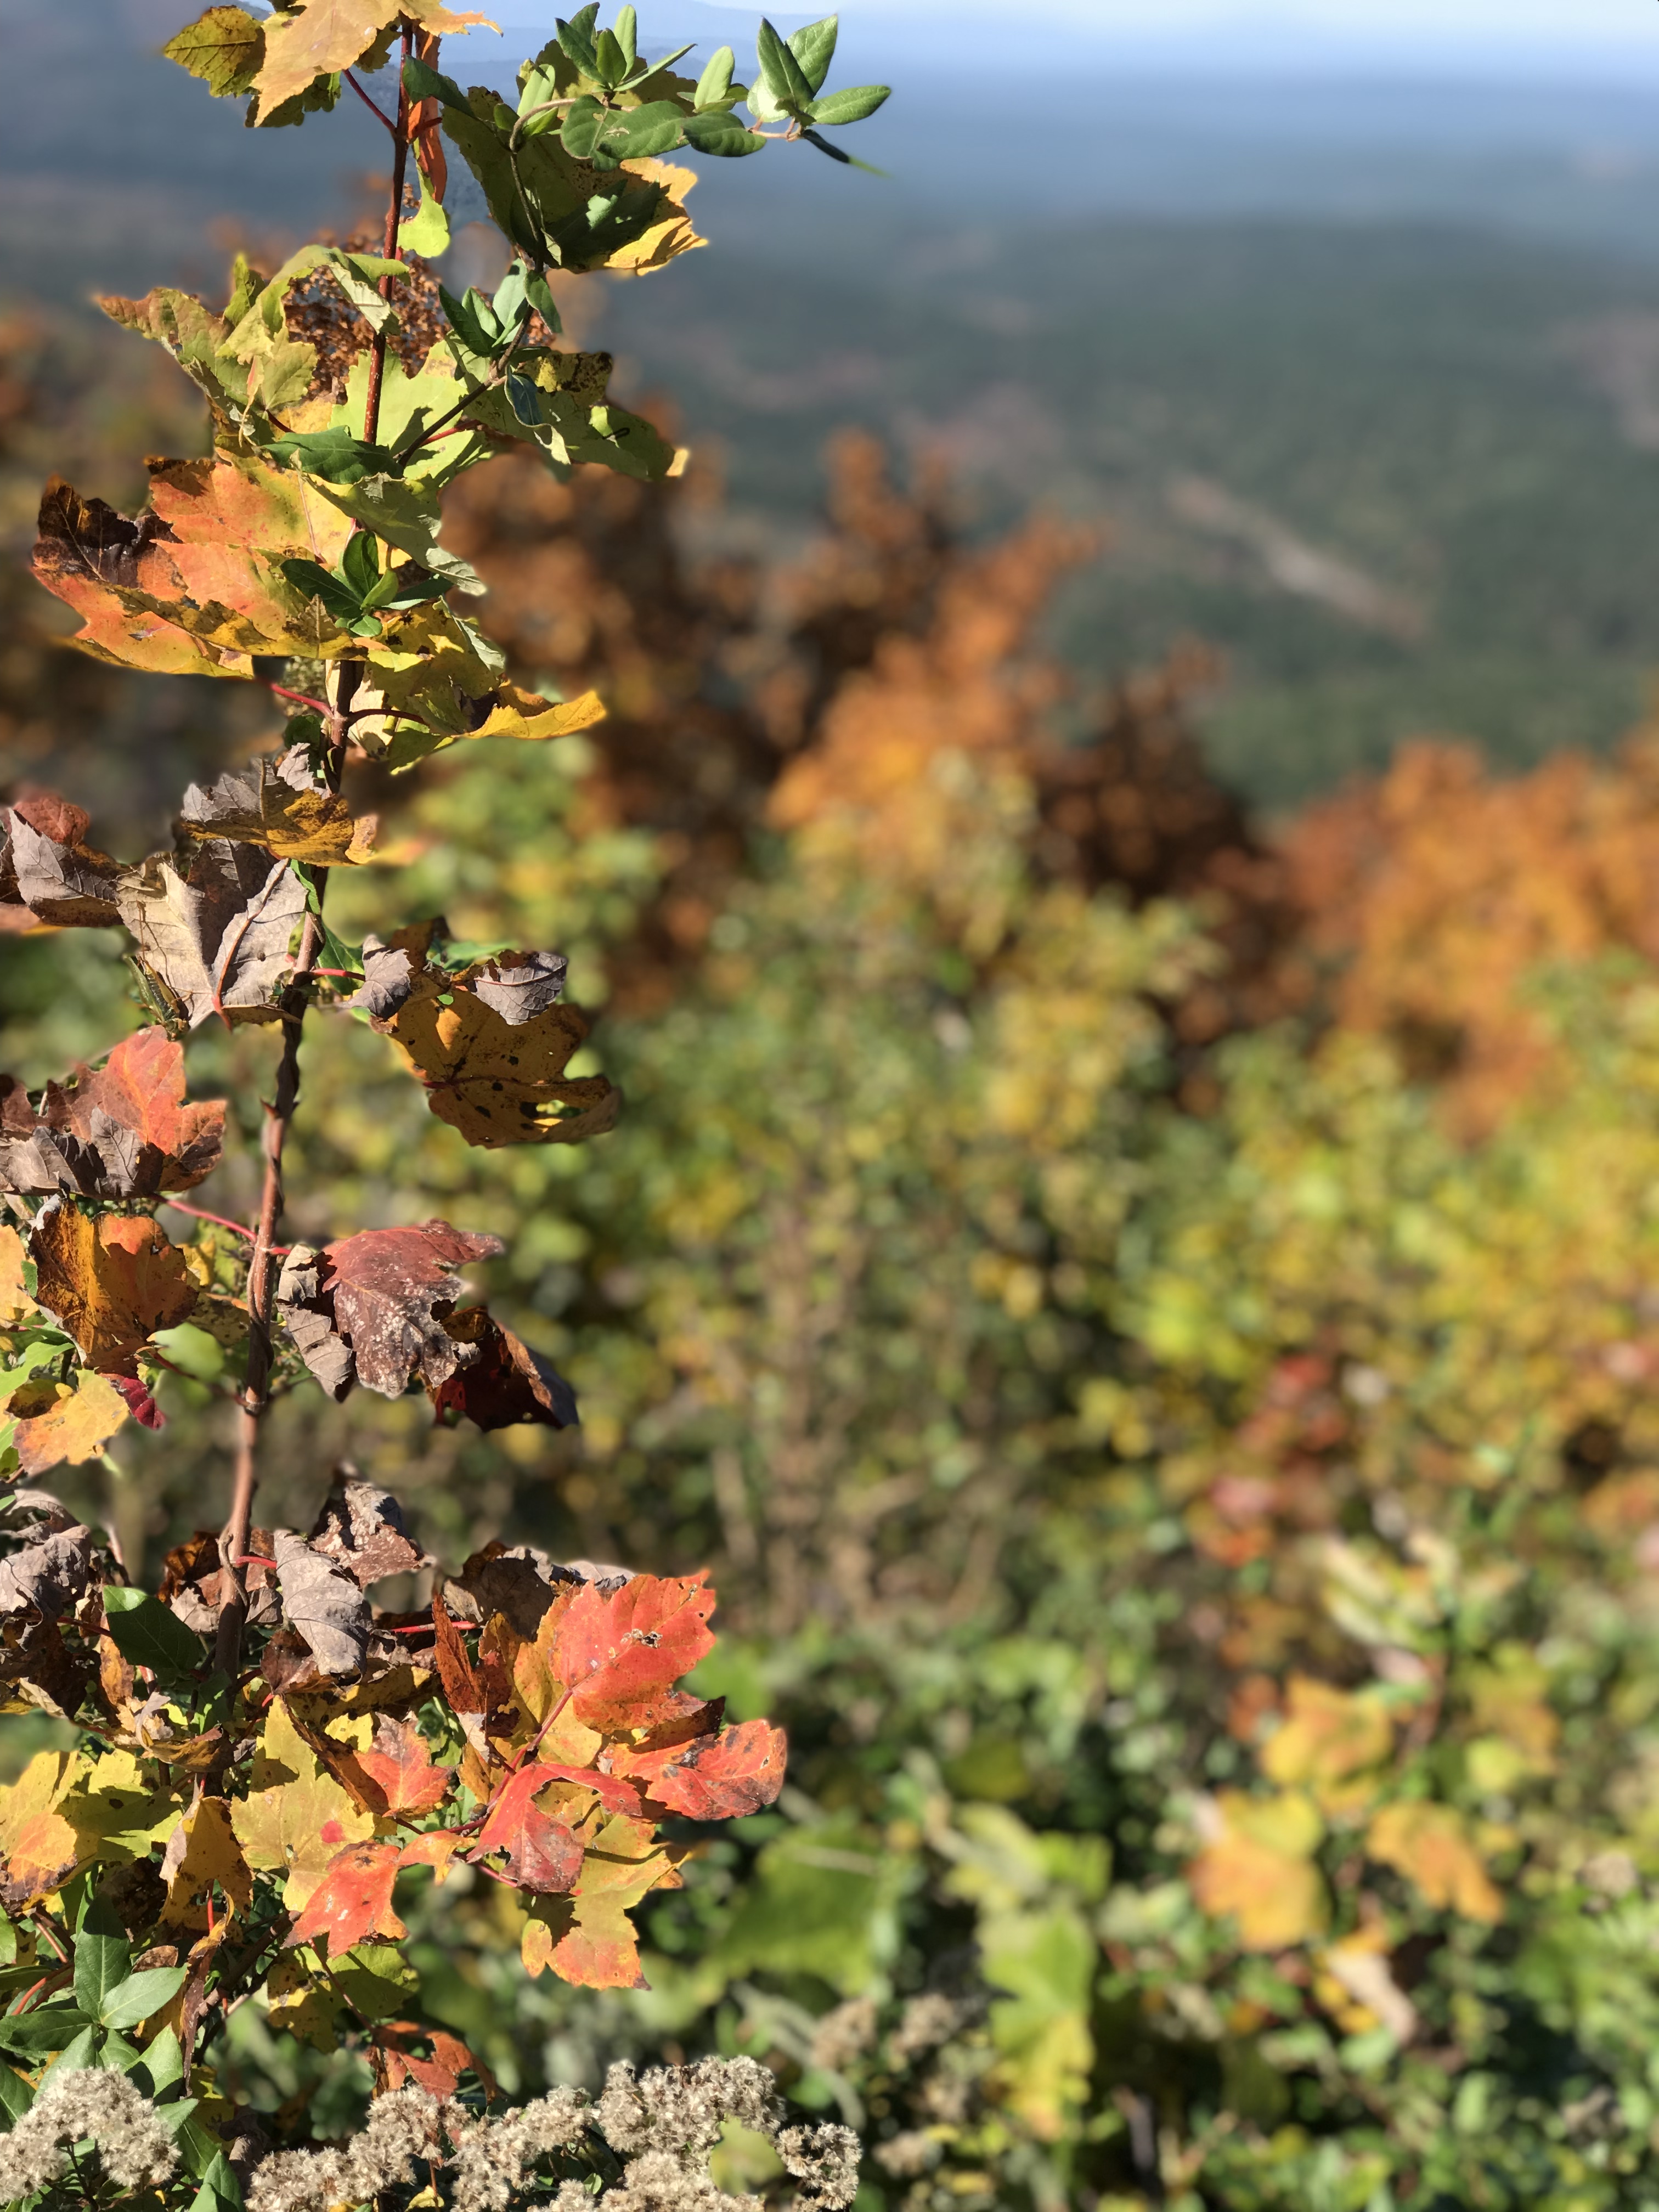 Come join us on our Fall Leaf Tour of the gorgeous Talimena Parkway. Autumn foliage was stunning in the Winding Stair Mountains of Ouachita National Forest. 